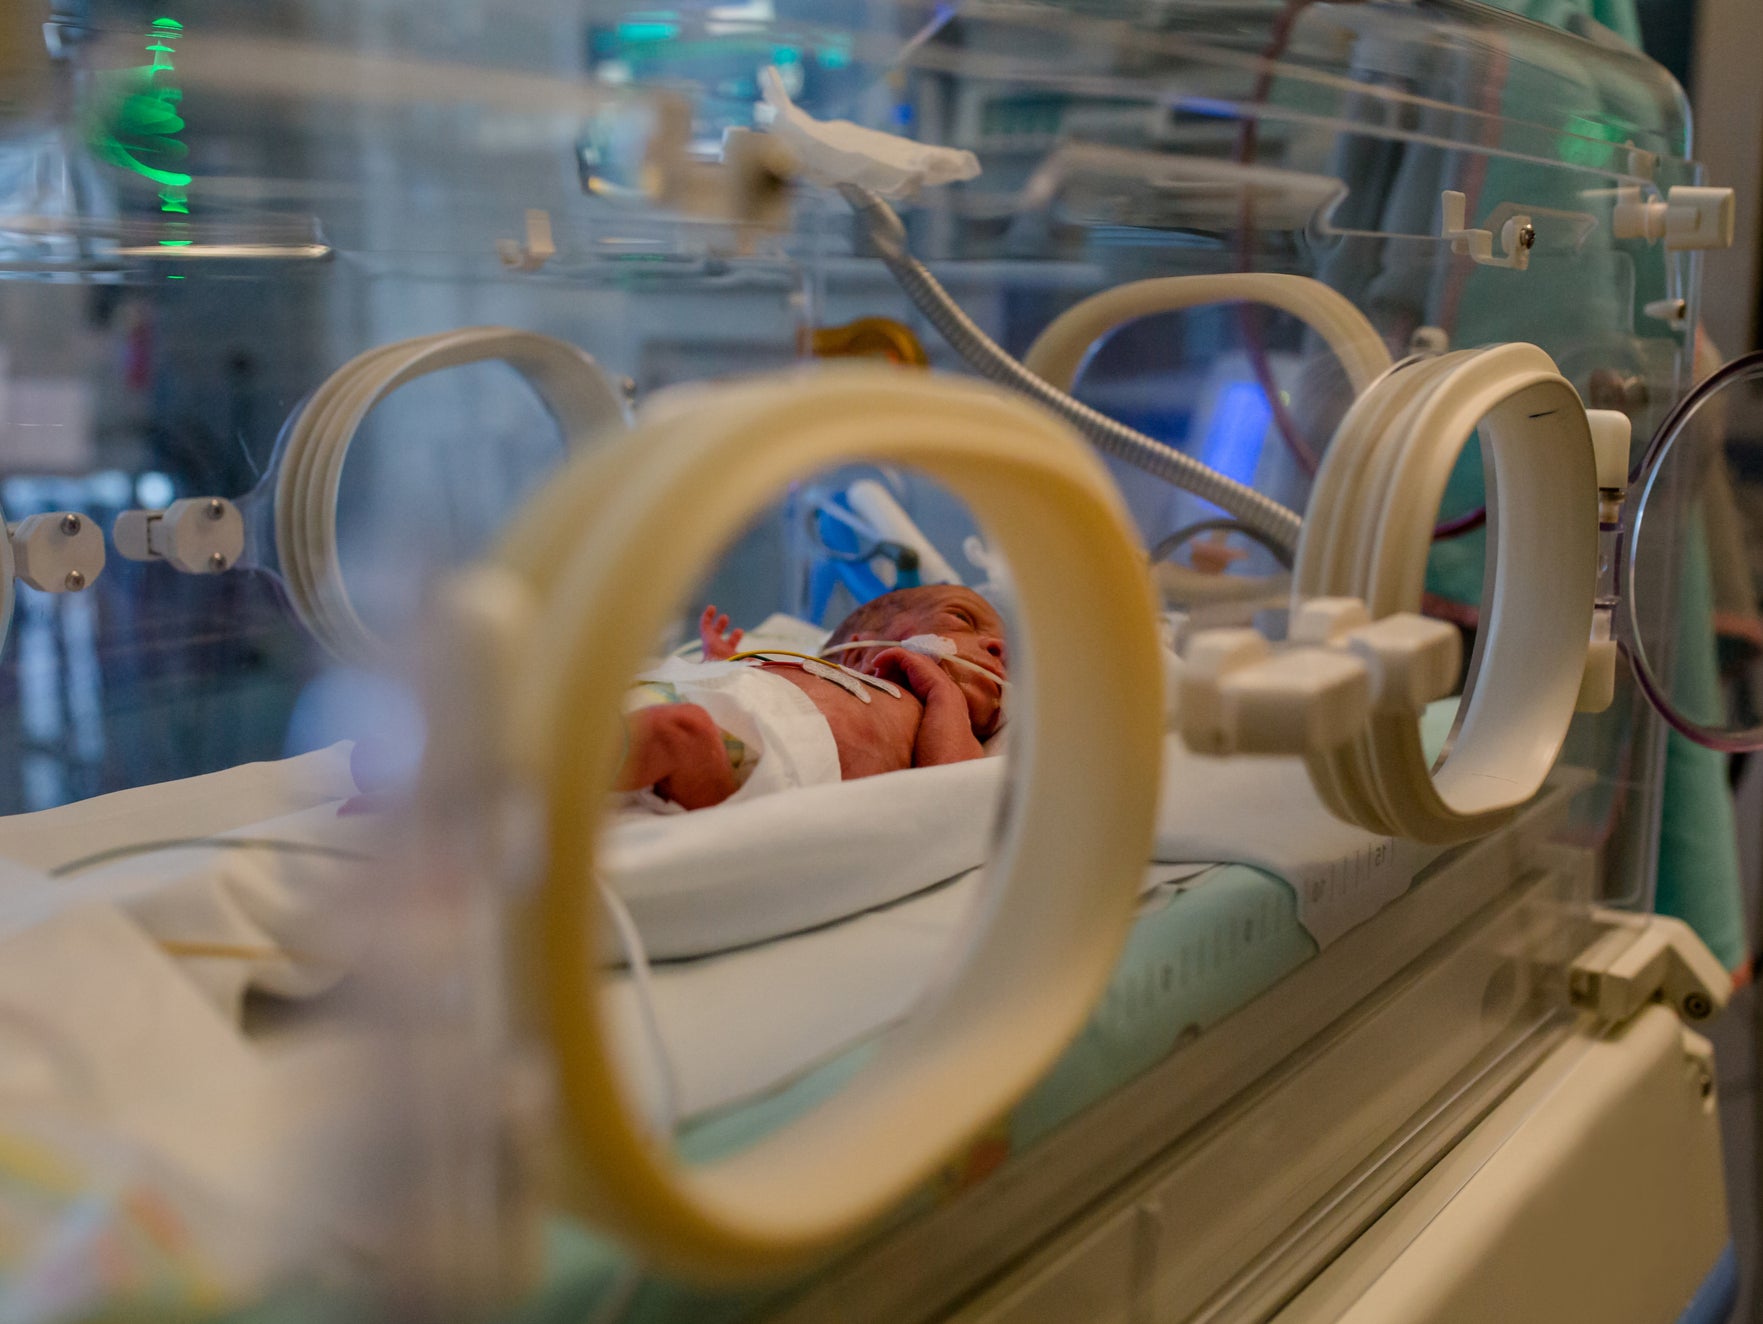 A newborn baby in an incubator at hospital